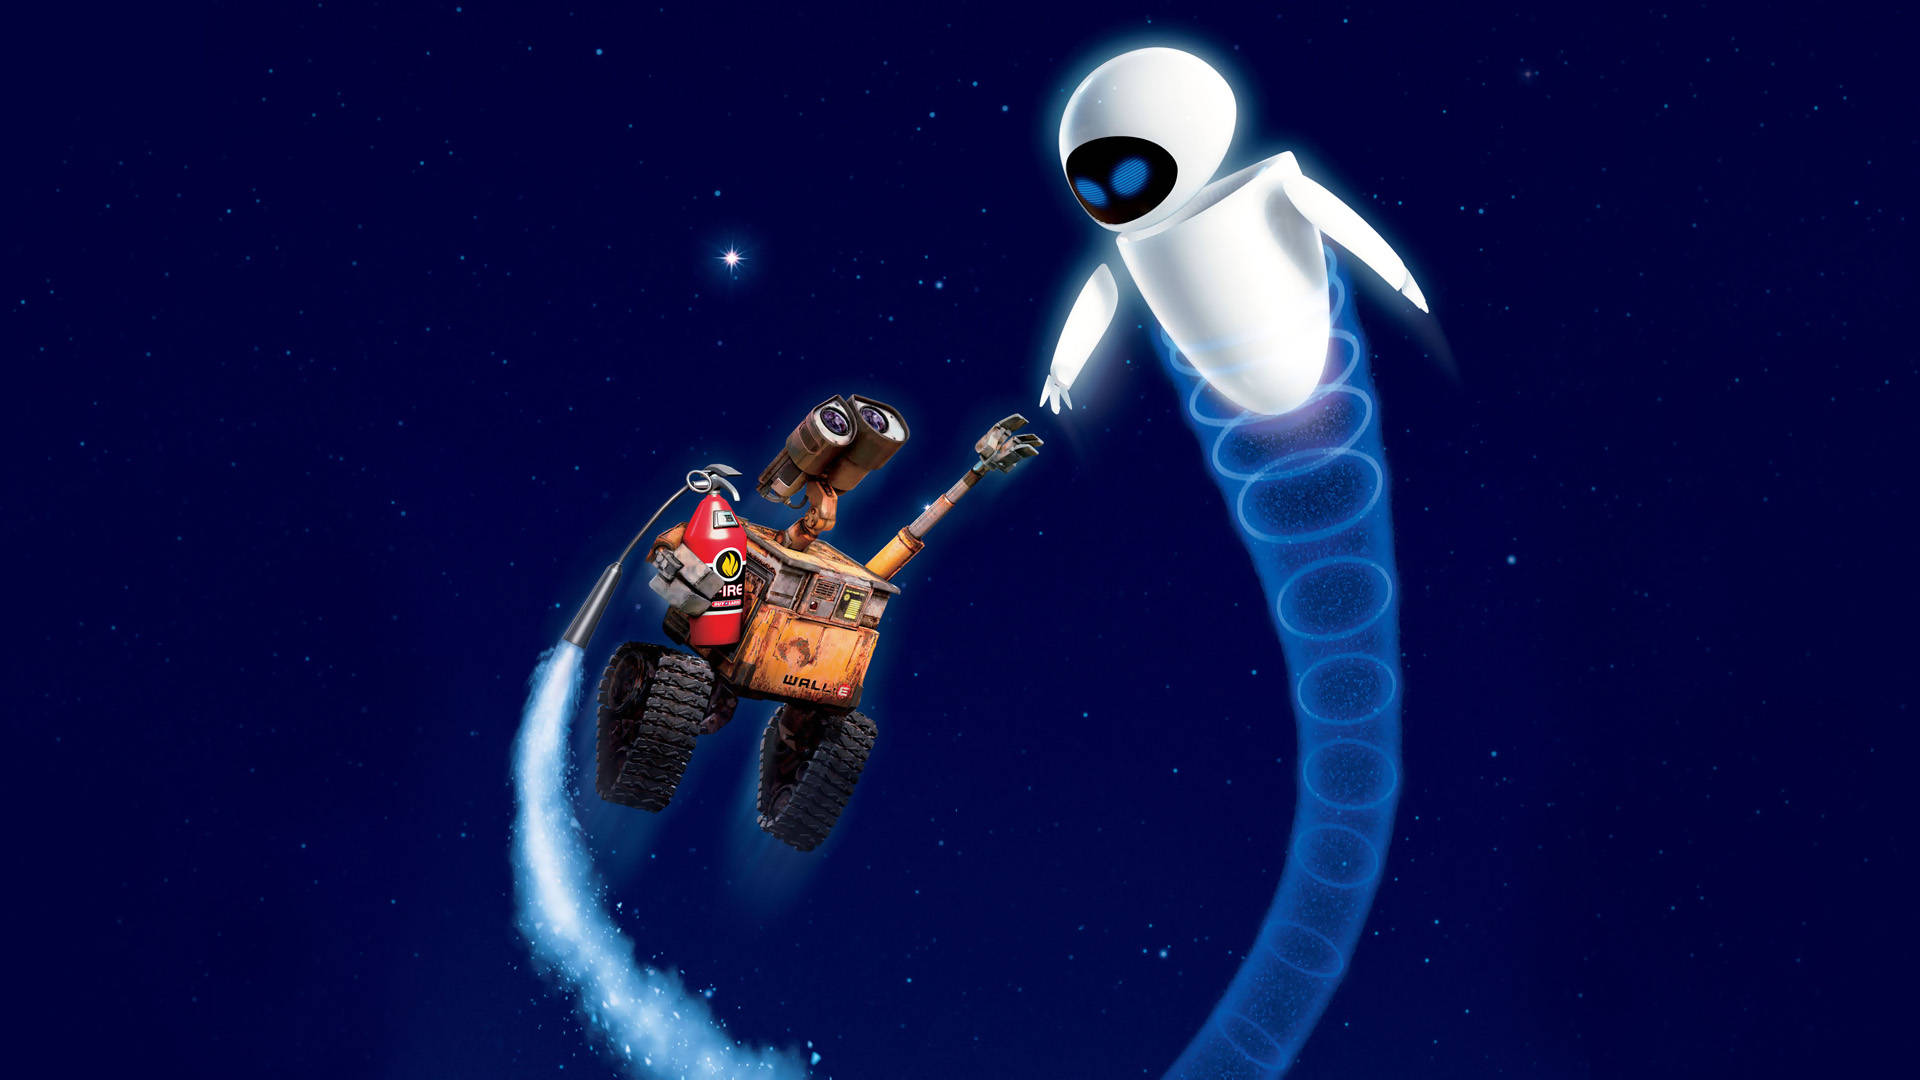 Wall E And Eve In The Galaxy